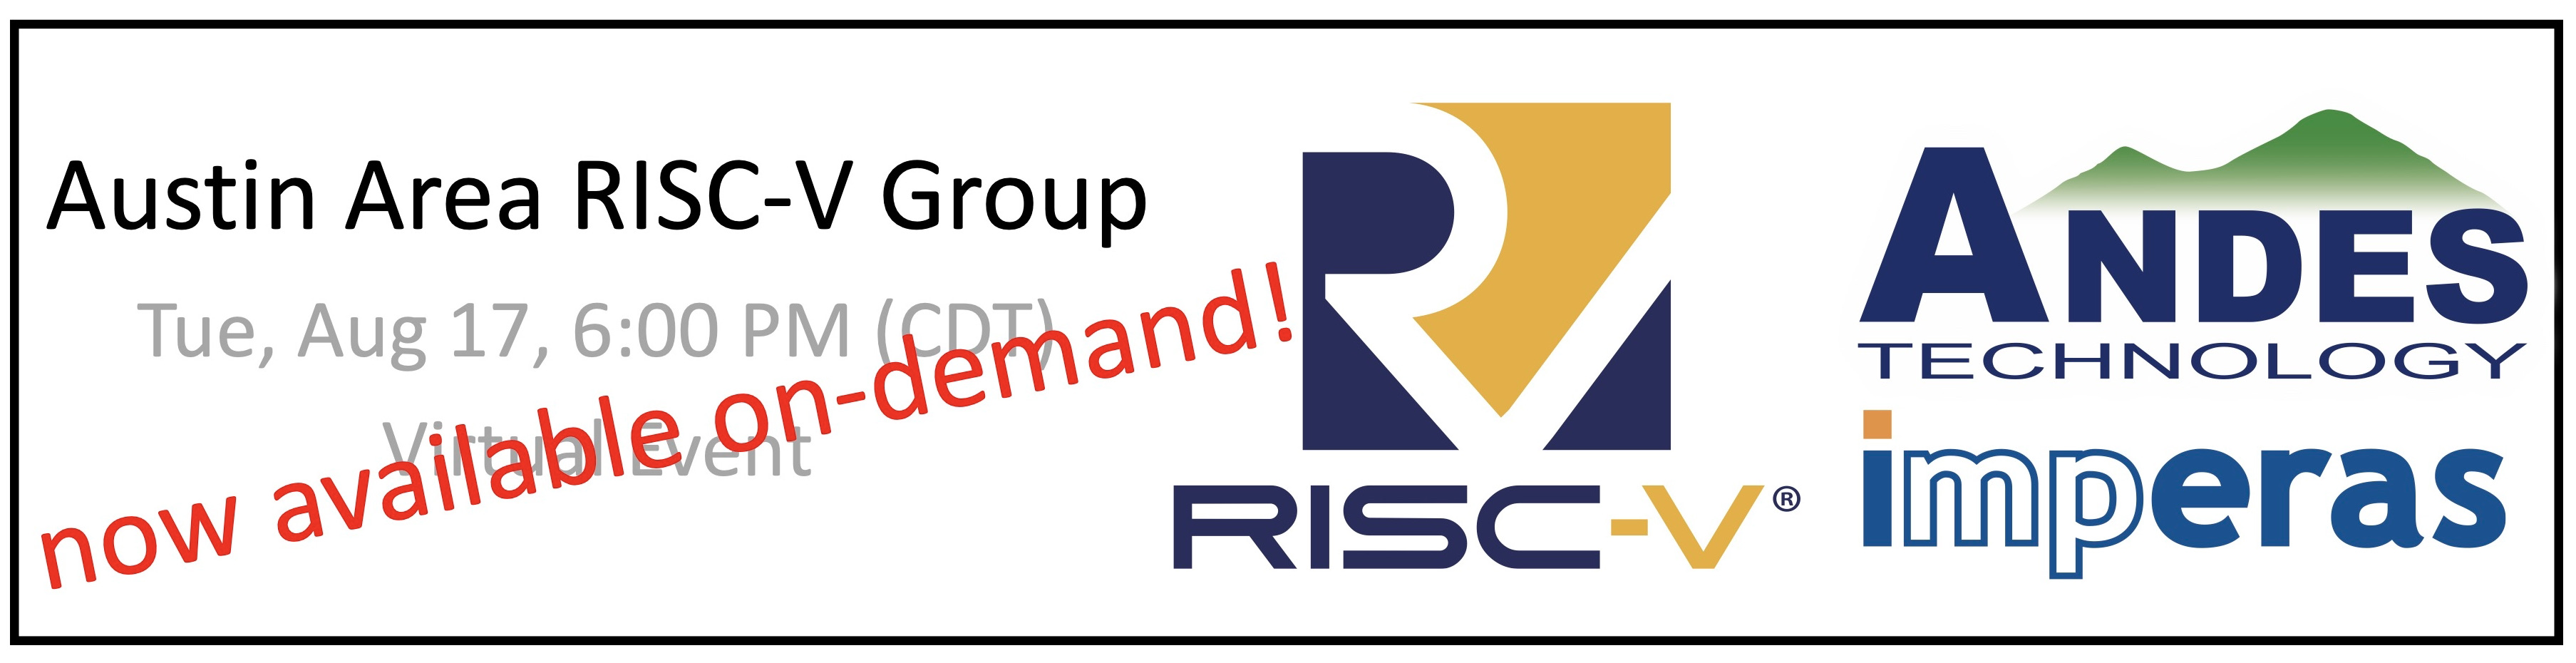 RISC-V Austin Group Meeting now available on YouTube